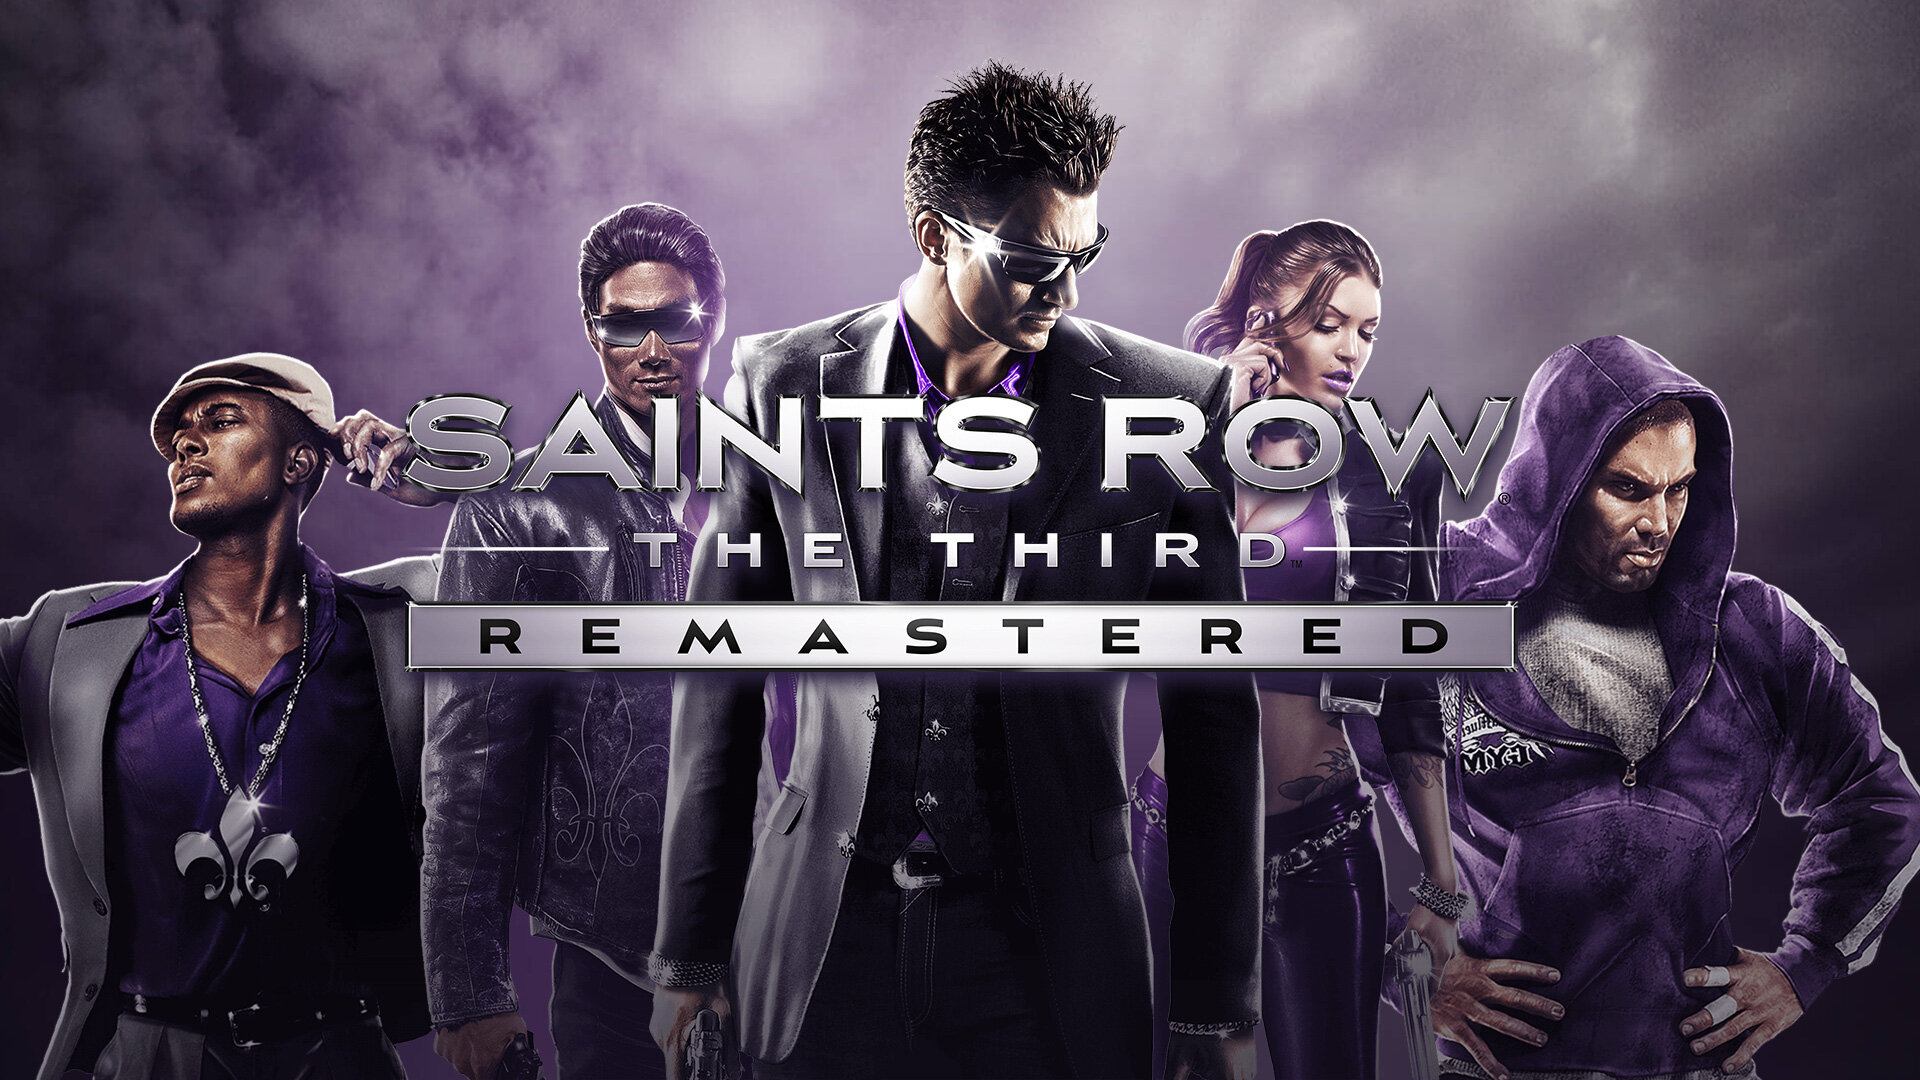 Saints Row: The Third Remastered announced & coming May 2020